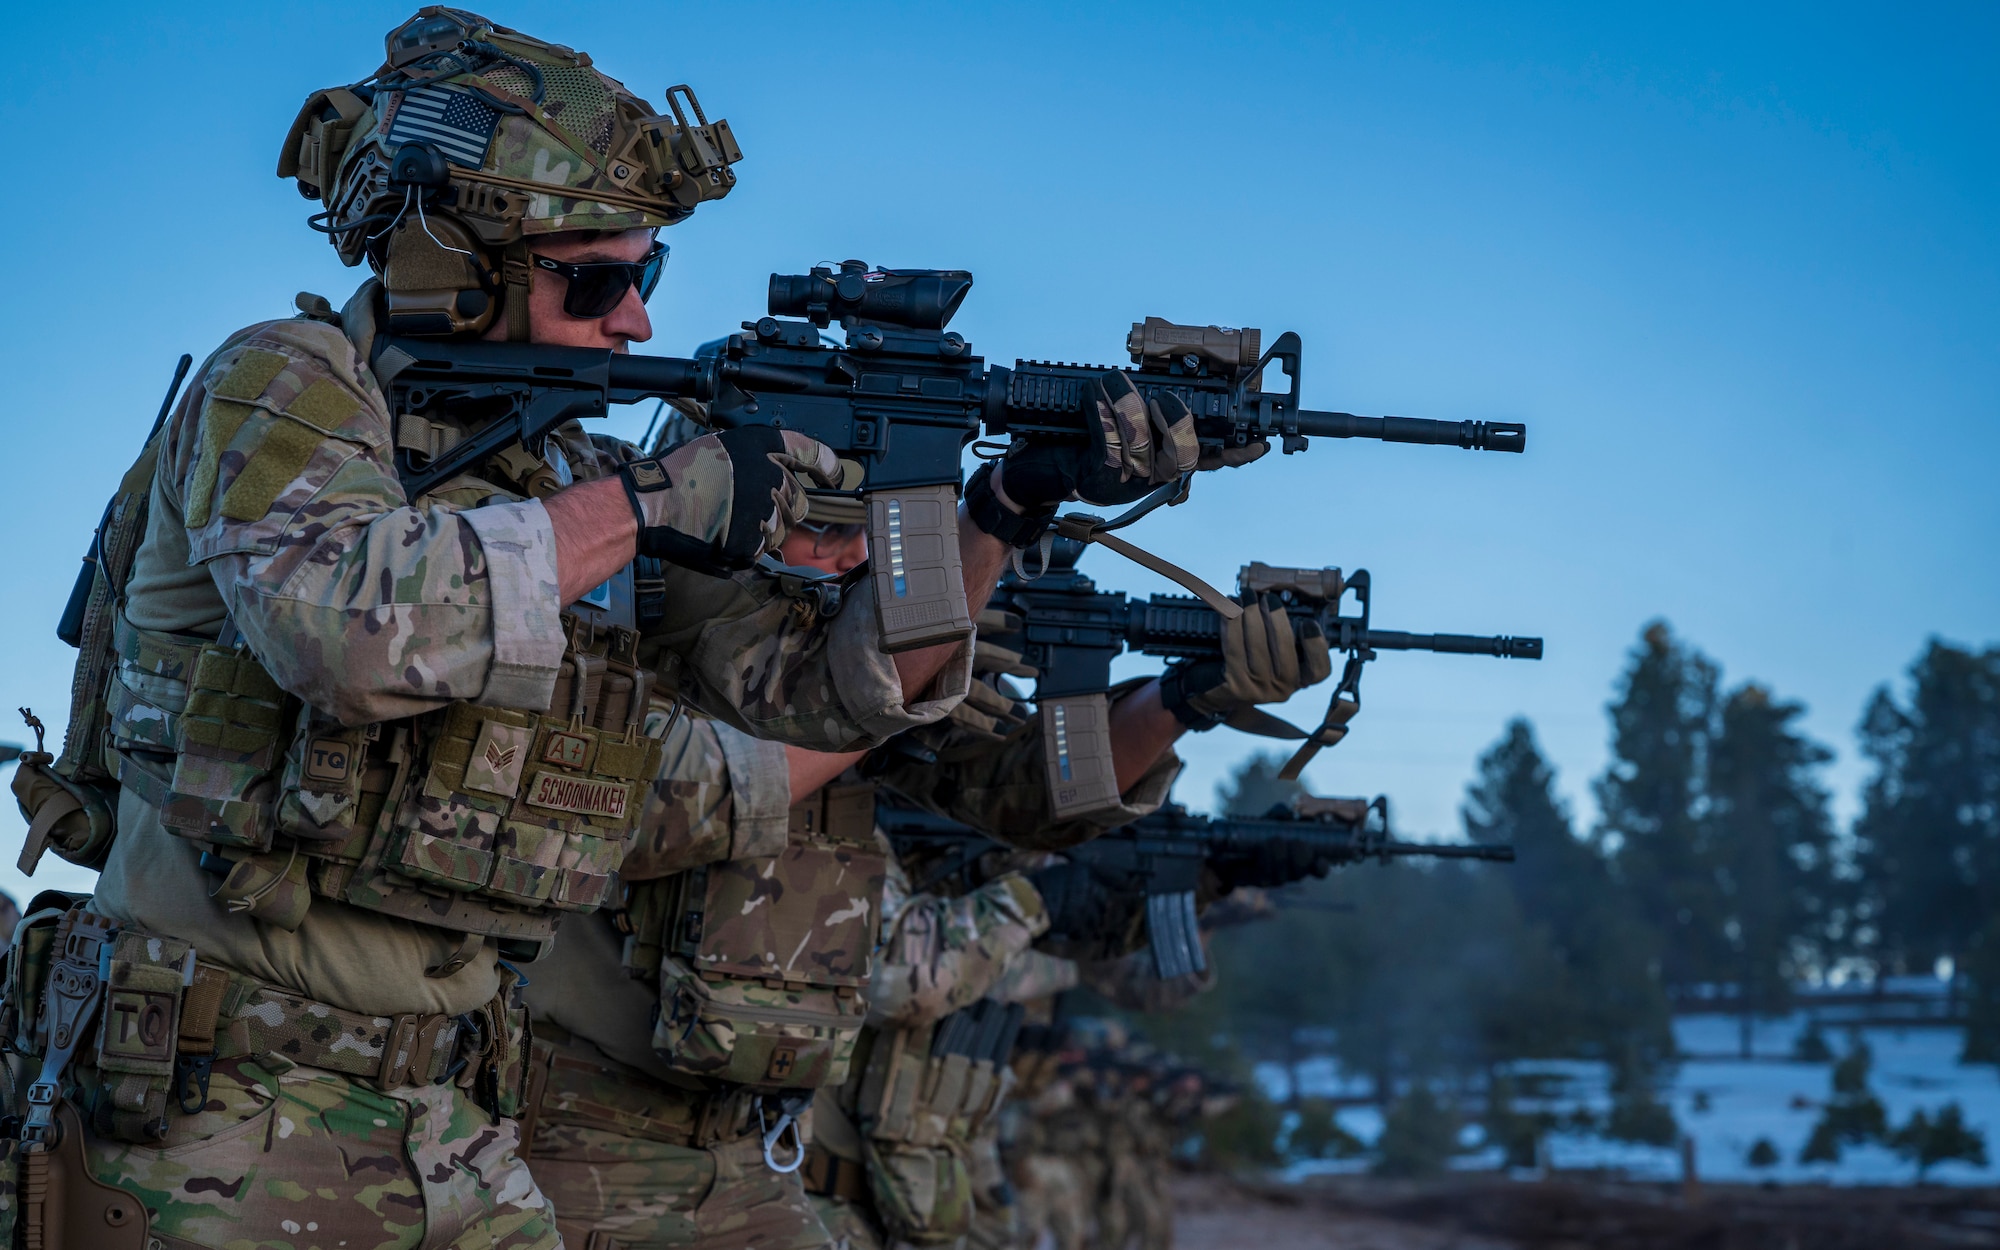 Members assigned to the 56th Civil Engineer Squadron Explosive Ordnance Disposal flight train with M4 carbine assault rifles on a firing range at Camp Navajo, Arizona, April 10, 2023.